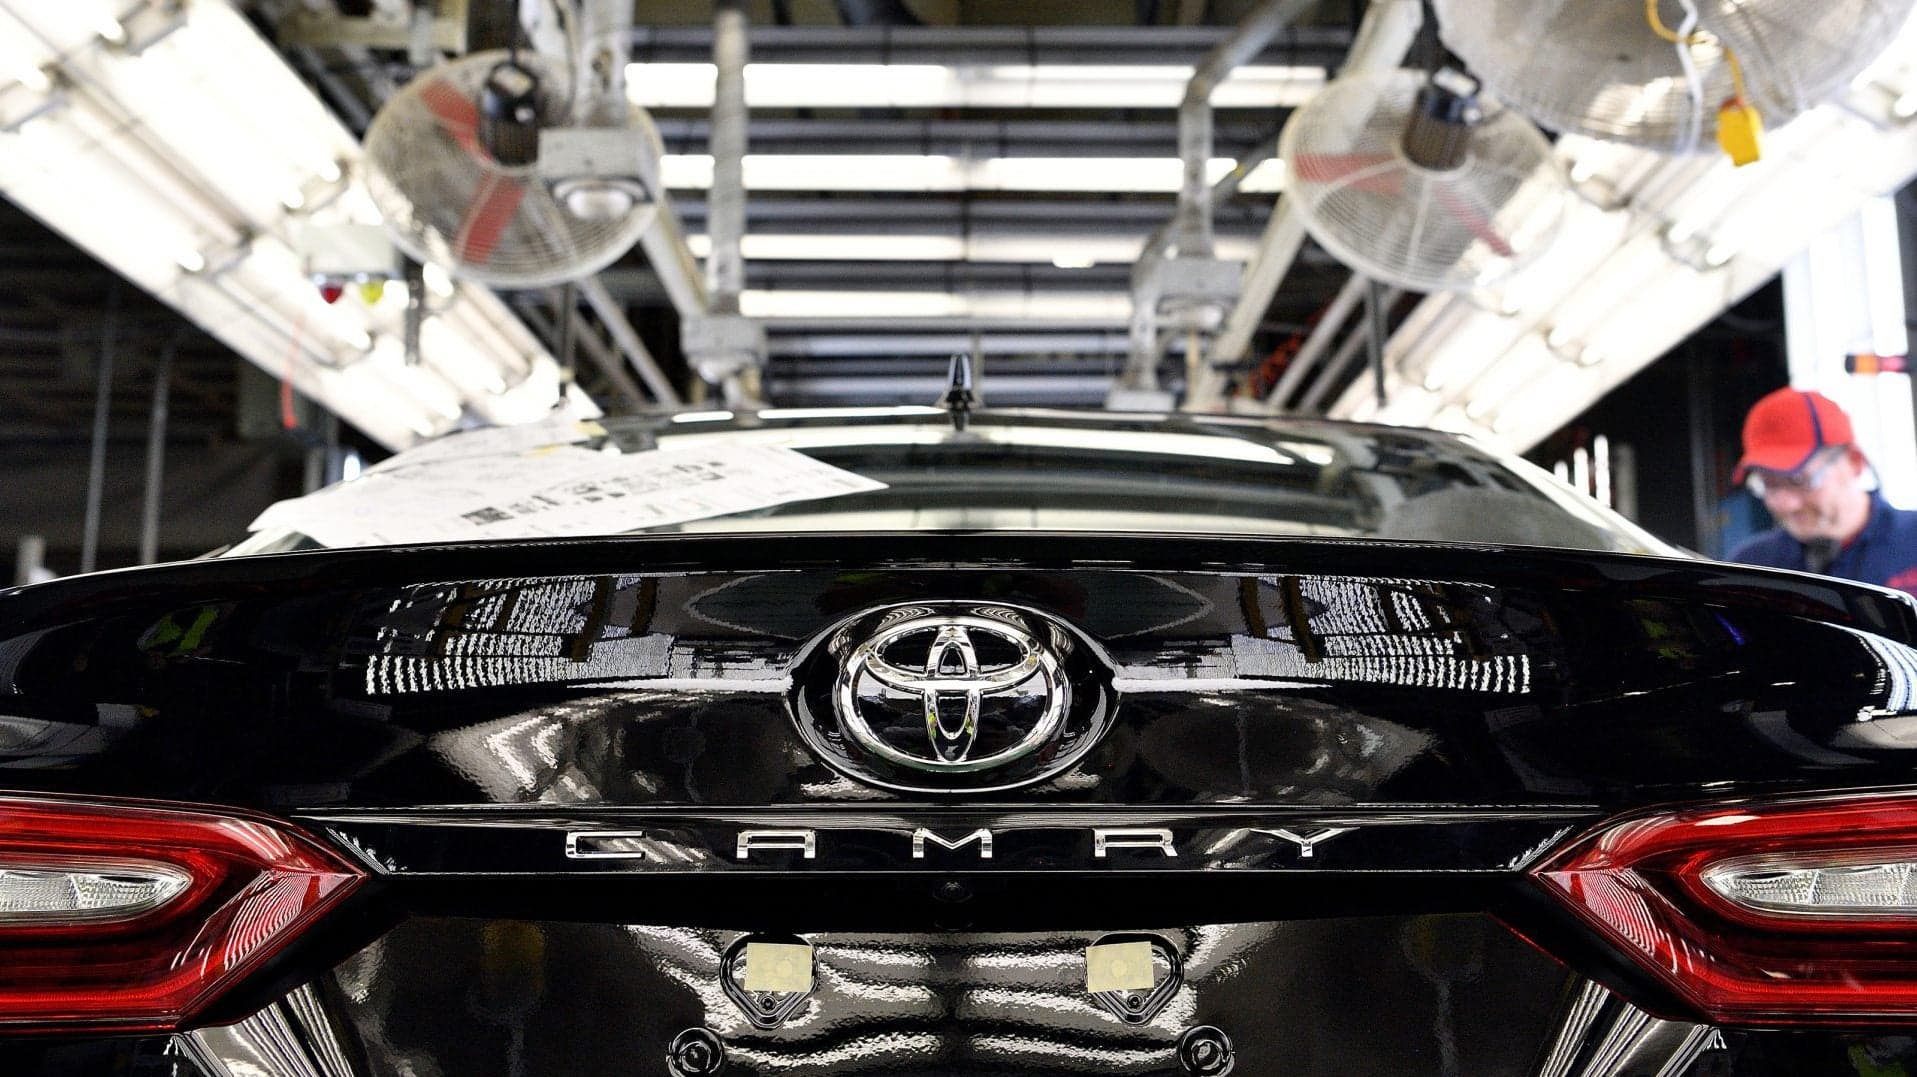 Toyota Plans More Than 10 New Electric Cars in Next 8 Years